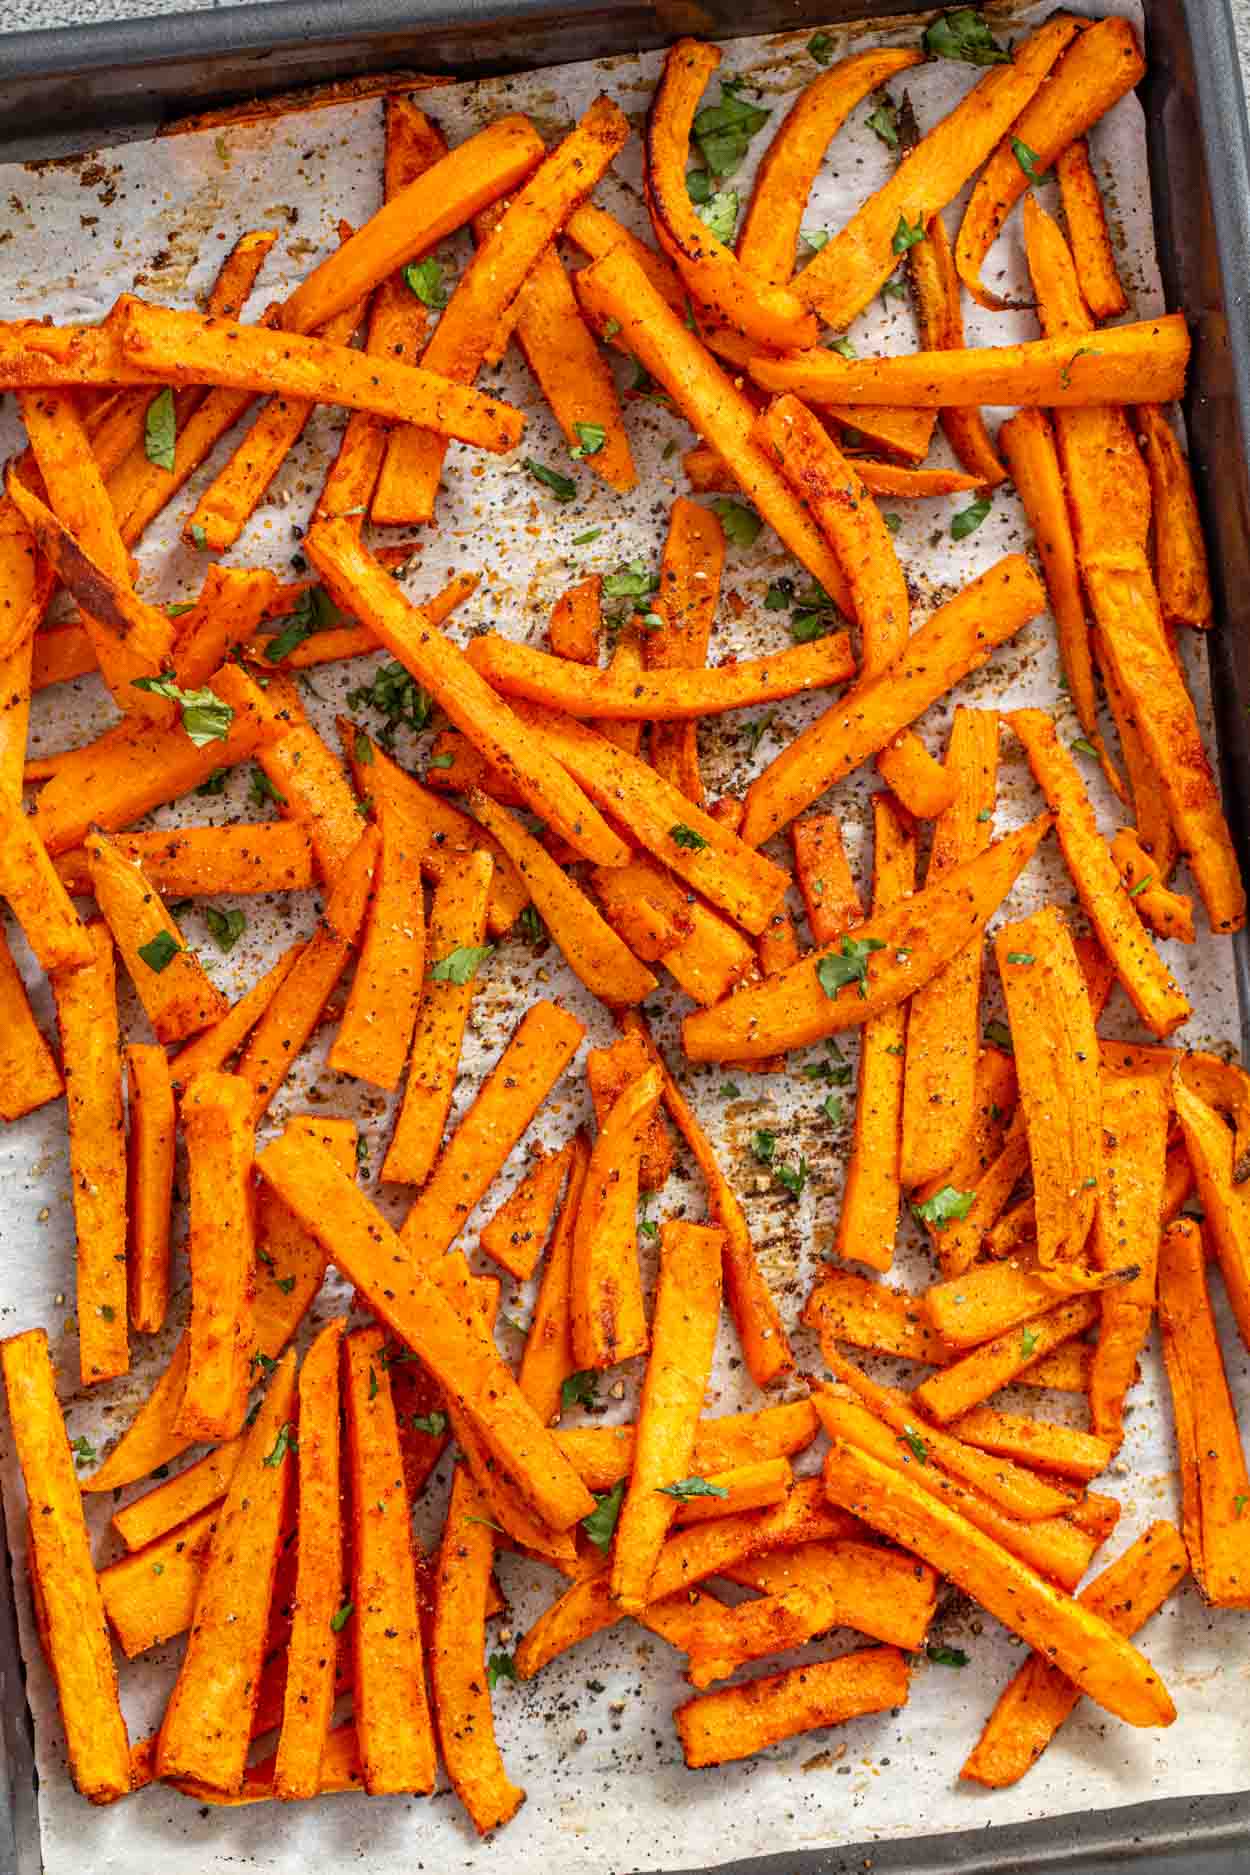 Sweet potato fries on a baking sheet topped with greens.